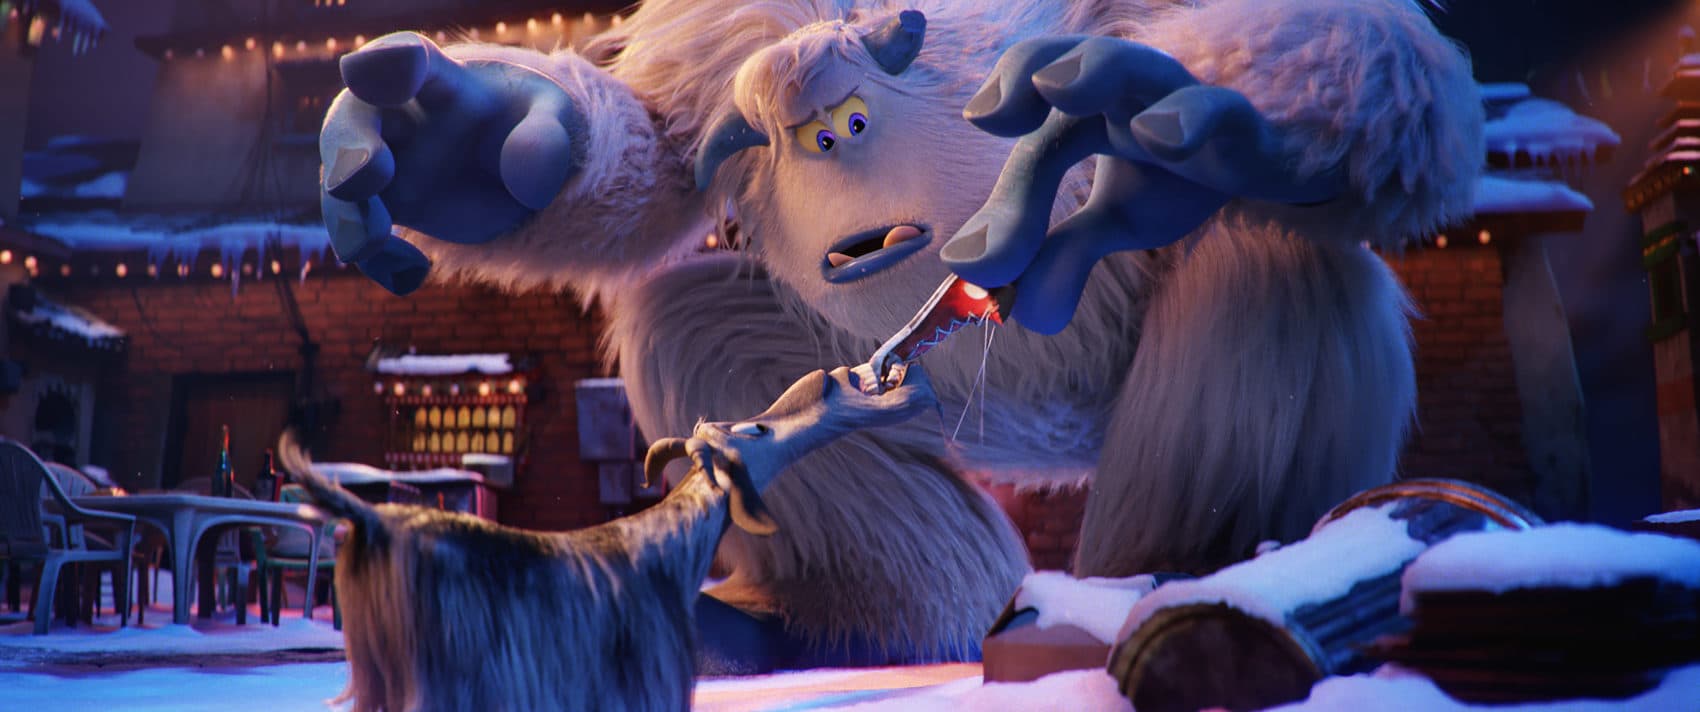 Goat and Migo voiced by Channing Tatum in a still from the new animated film &quot;Smallfoot.&quot; (Courtesy of Warner Bros. Pictures)